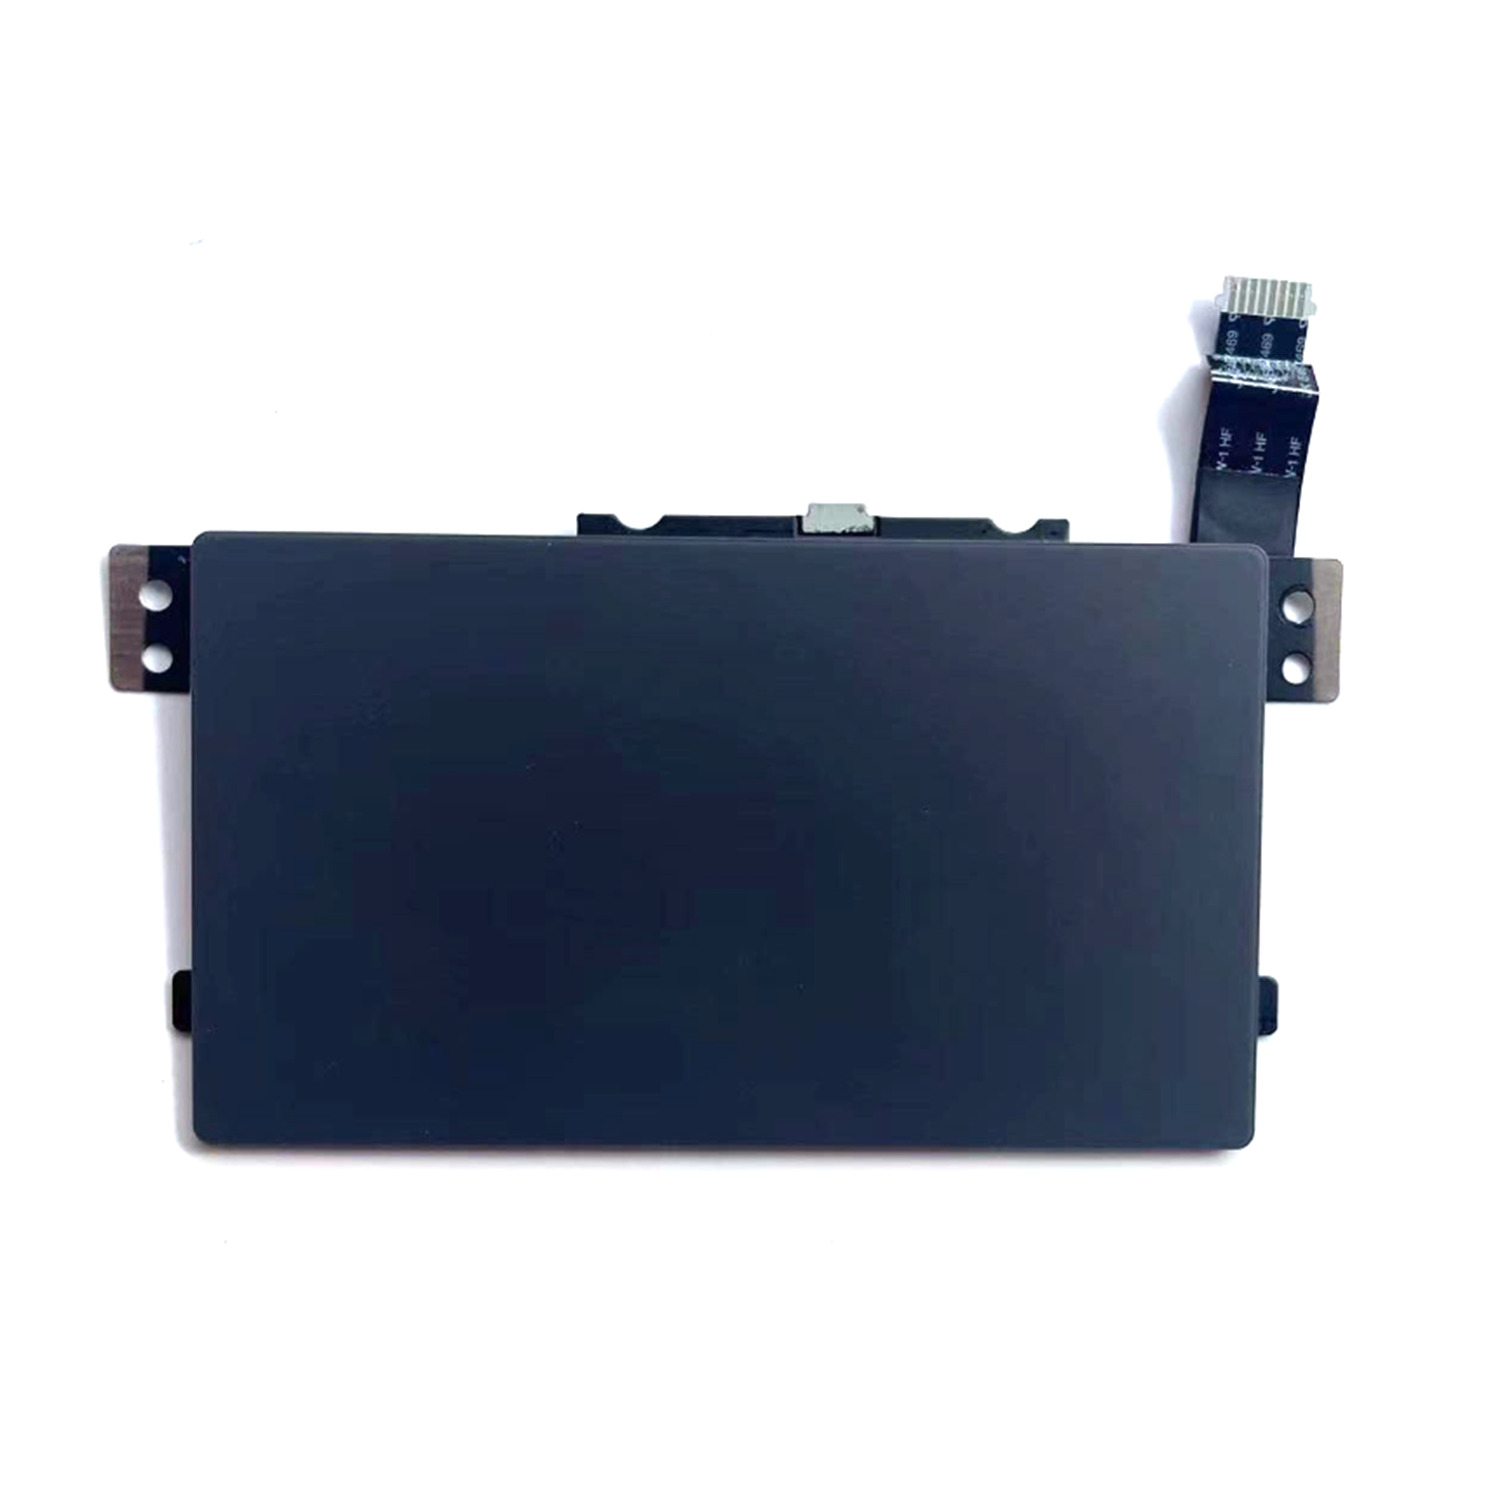 New For Dell G15 5510 5511 5515 Touchpad Trackpad Mouse Board Black 09G46W